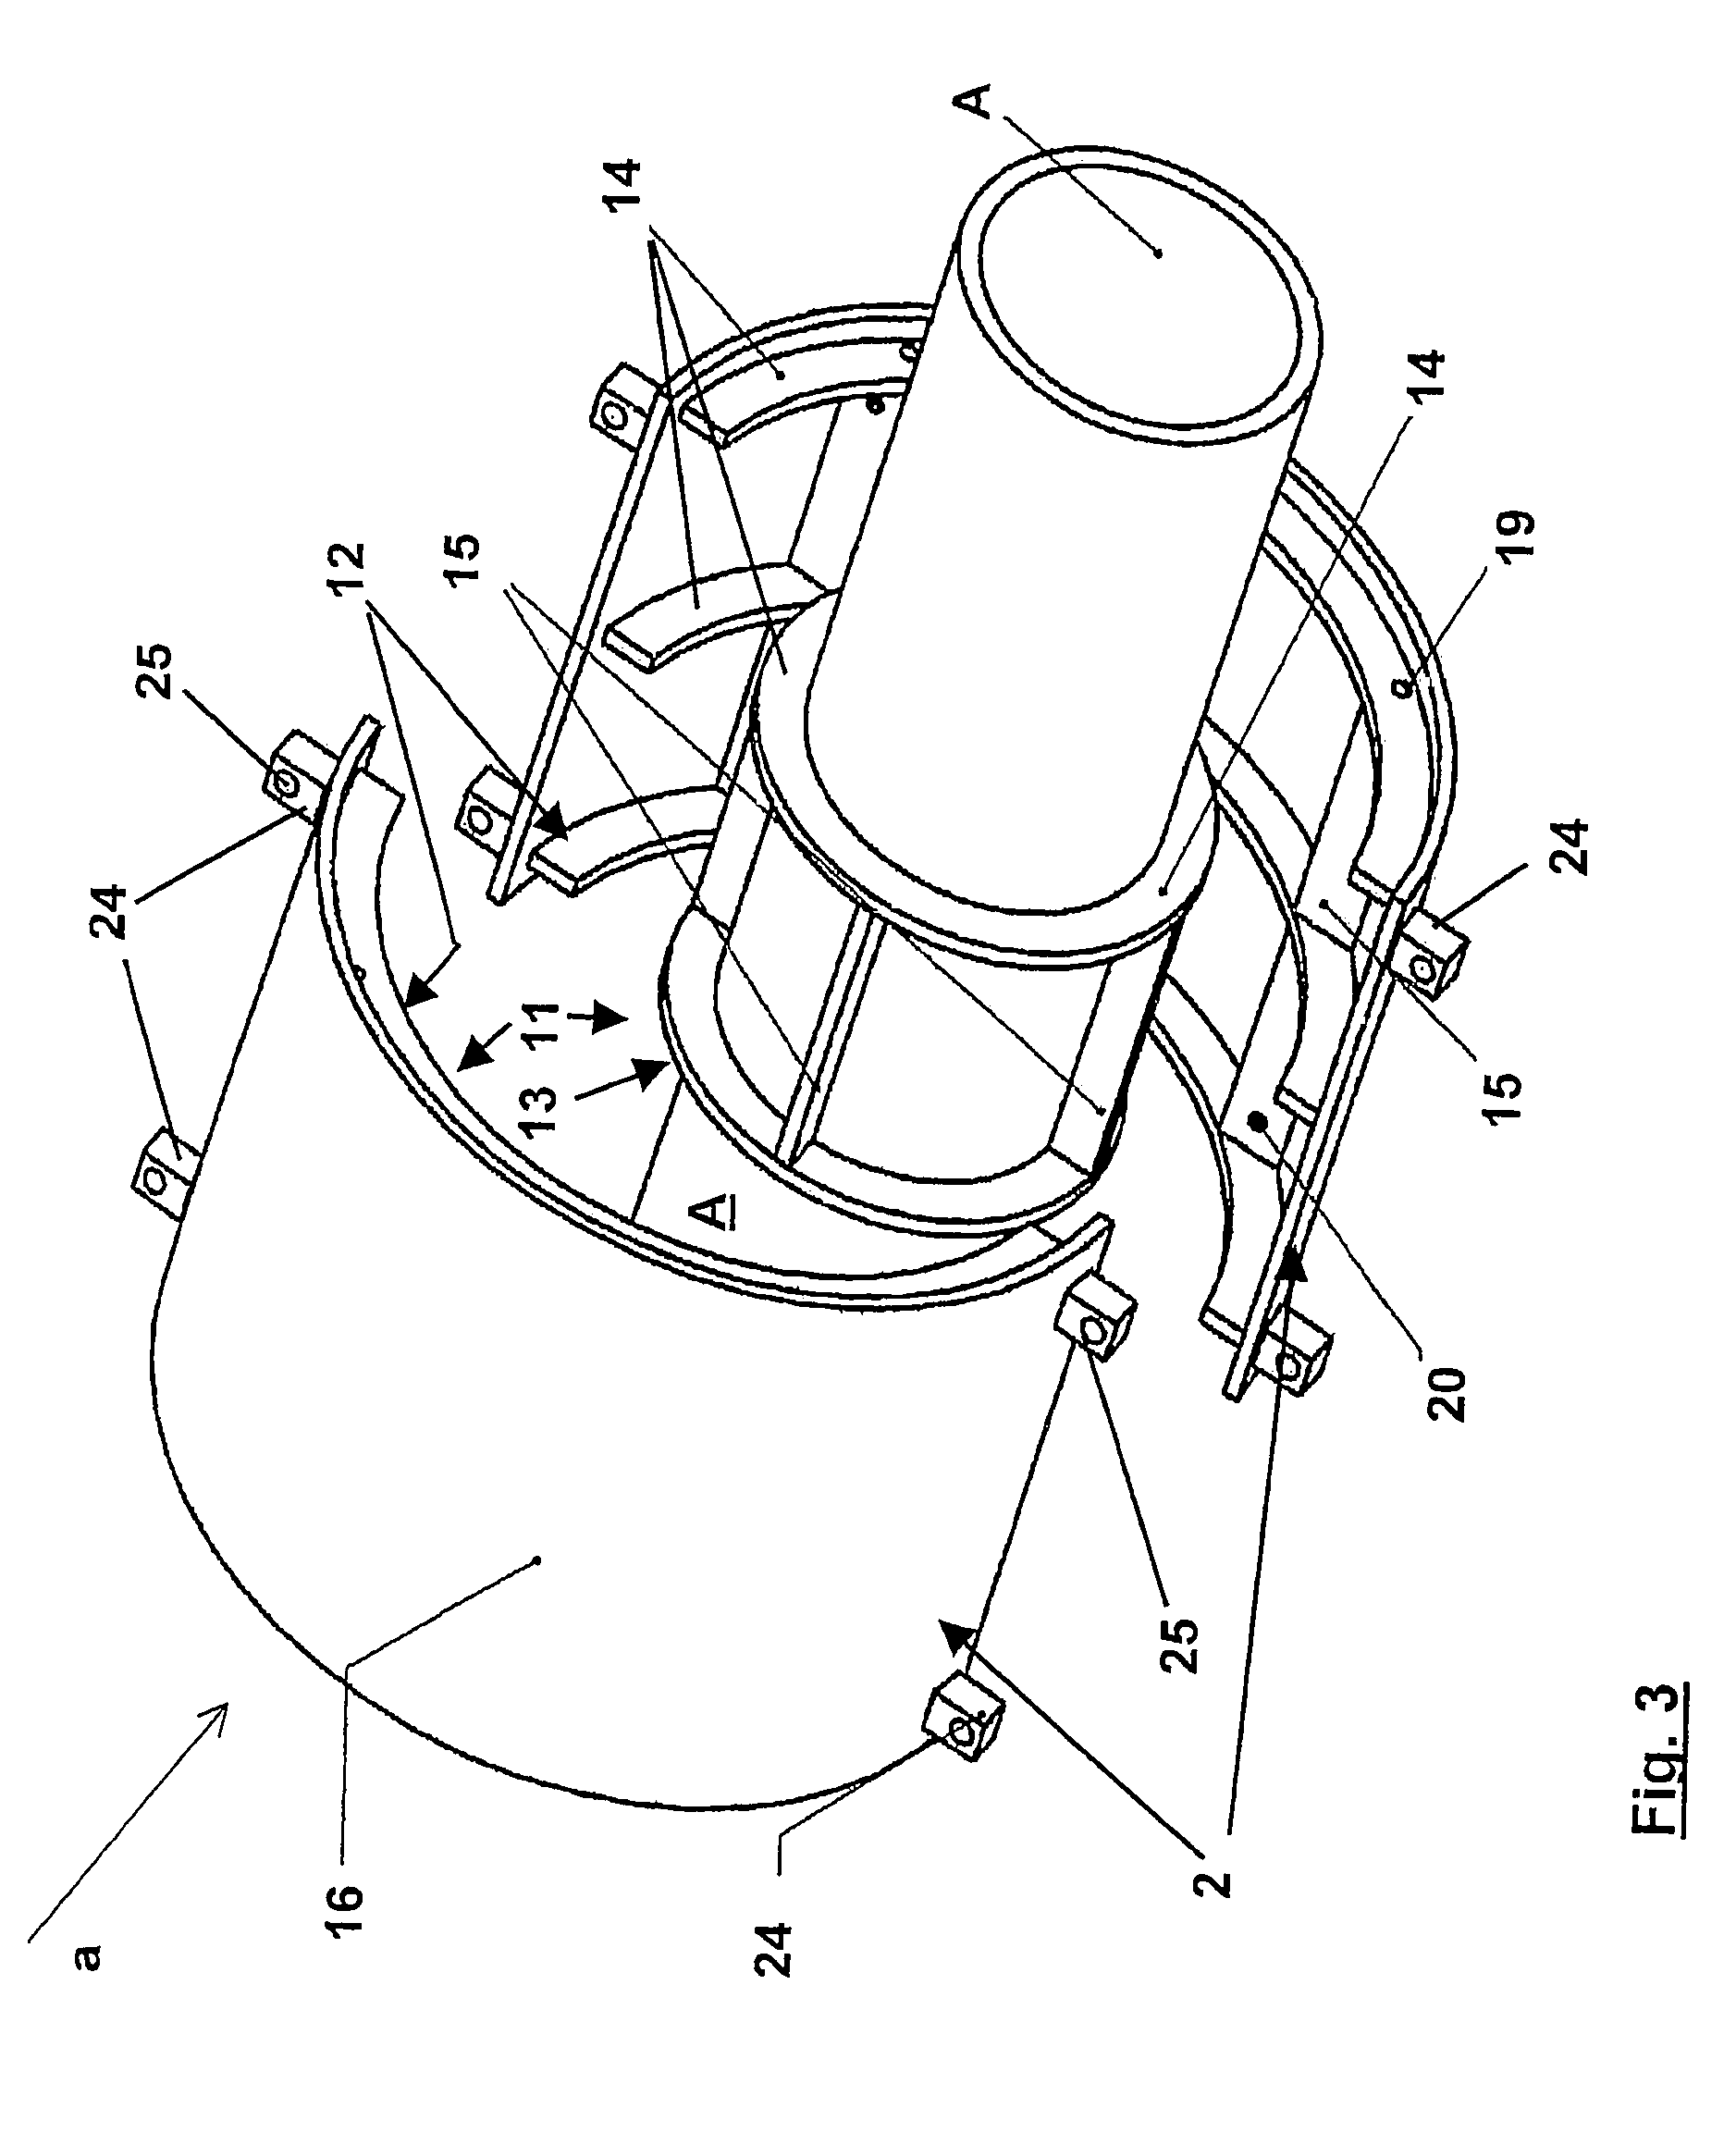 Cold-insulated fixed-point support